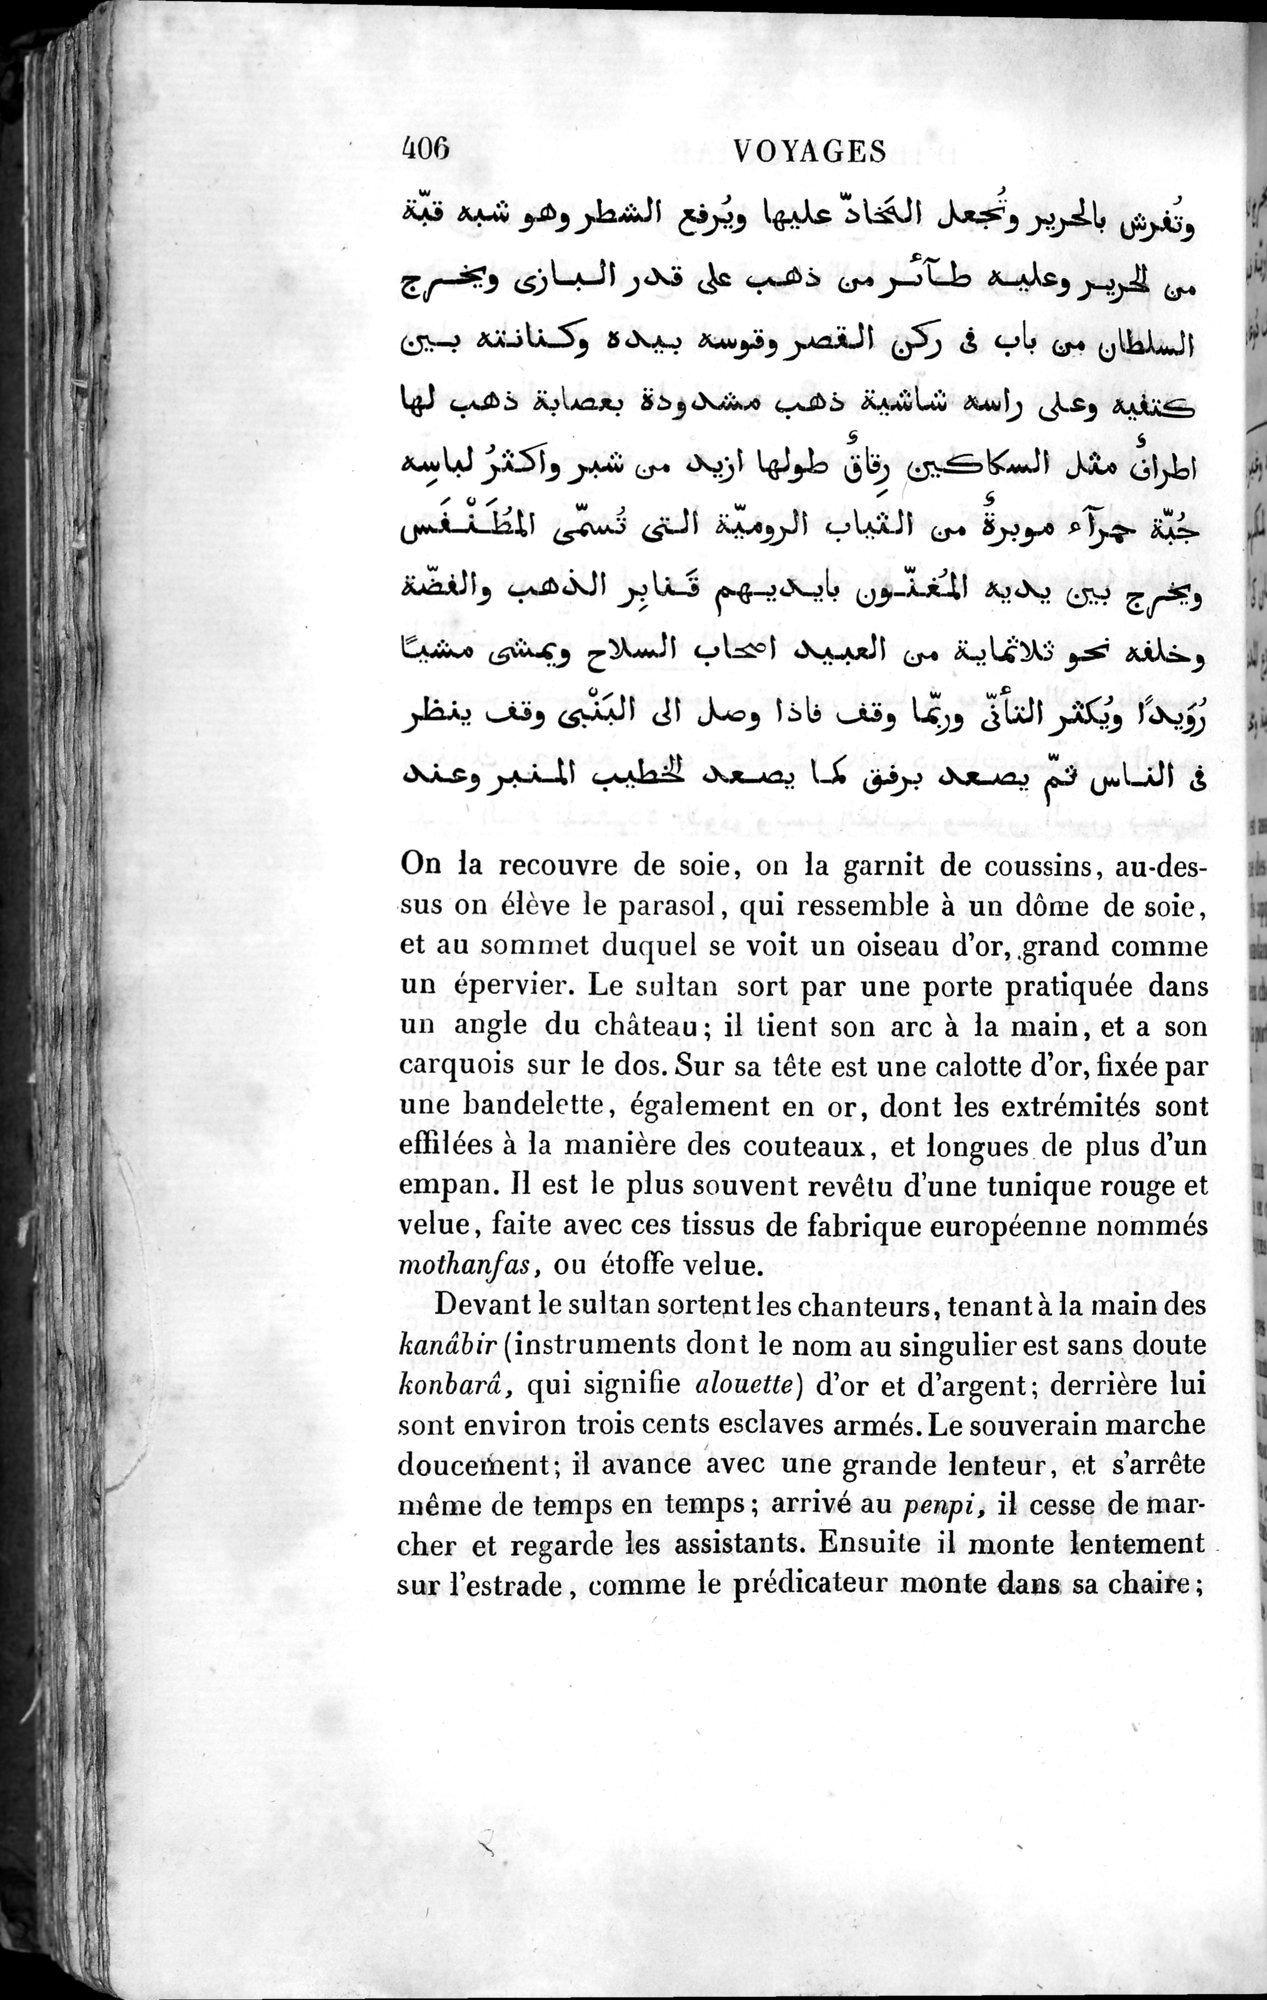 Voyages d'Ibn Batoutah : vol.4 / Page 418 (Grayscale High Resolution Image)